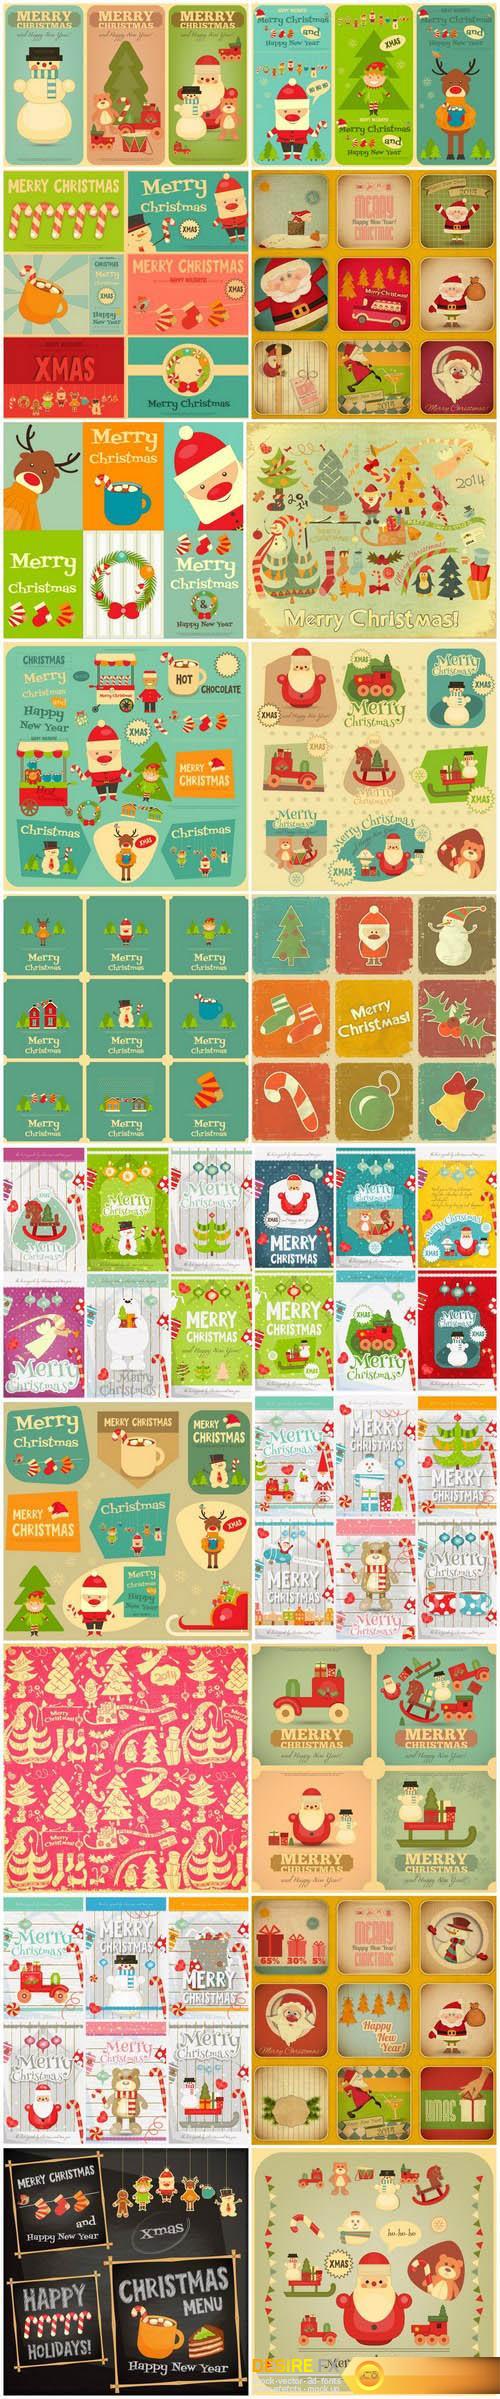 Christmas posters and New Year's design elements - 20xEPS